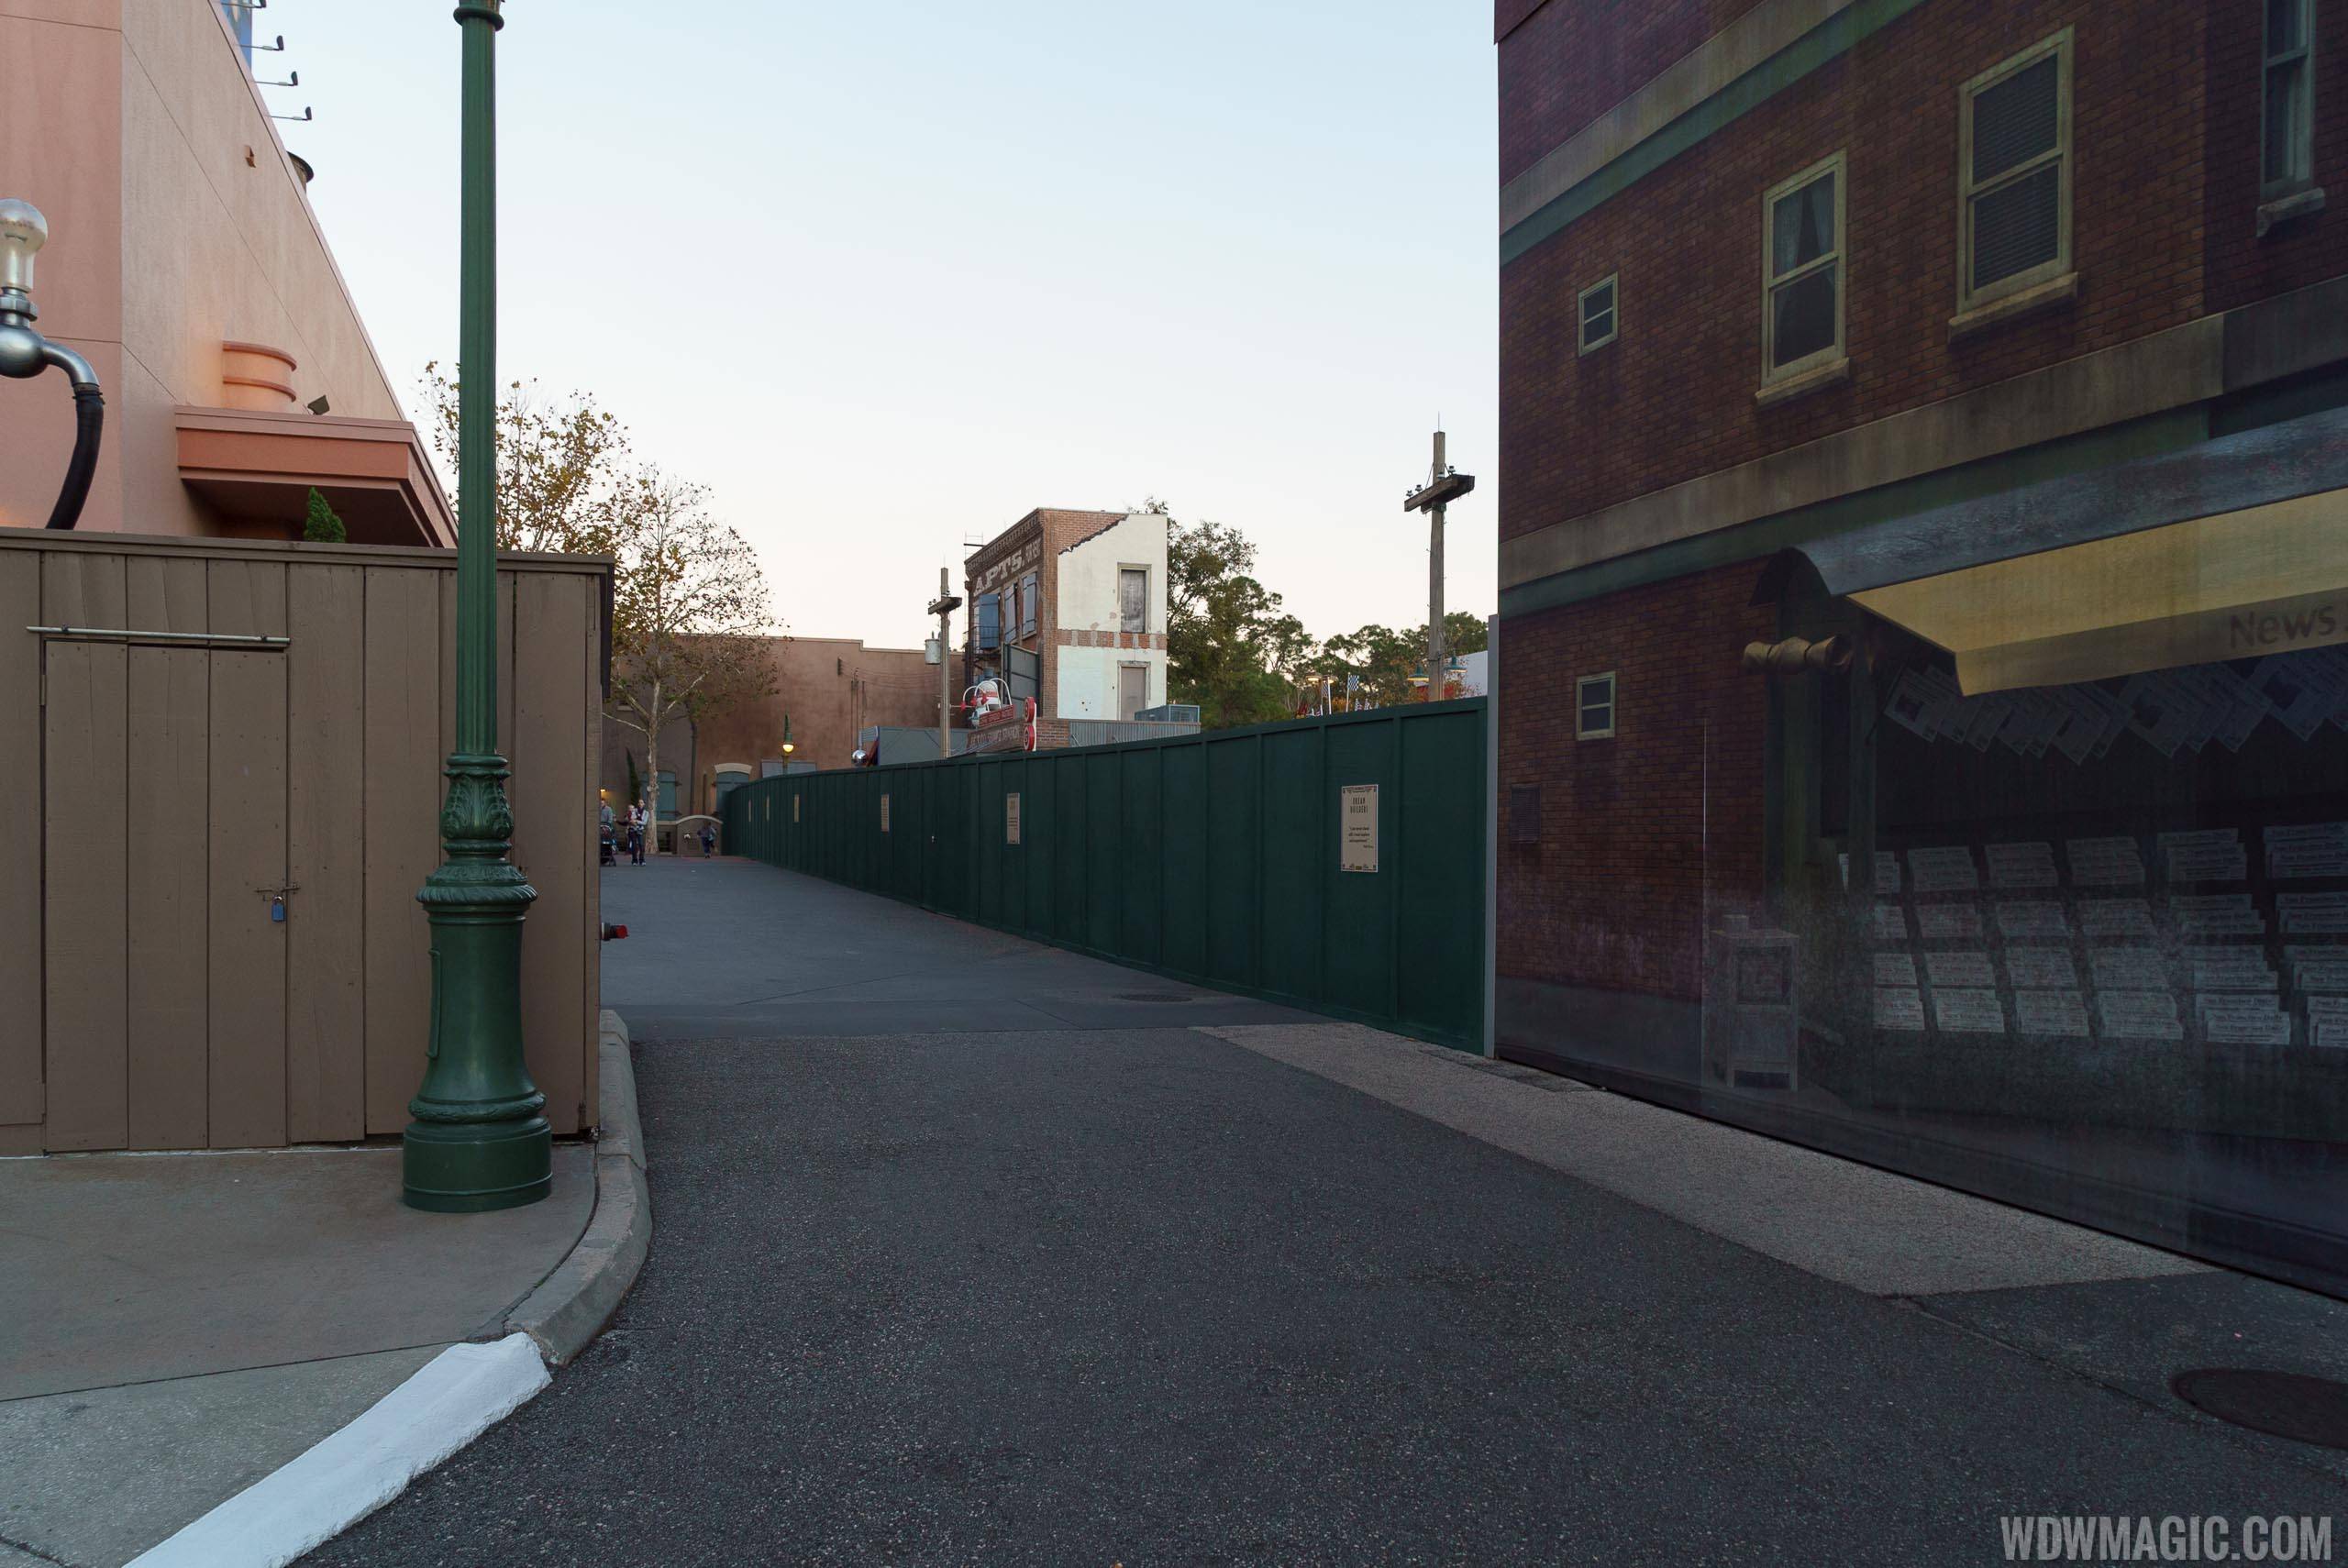 Construction walls at the back of the Streets of America